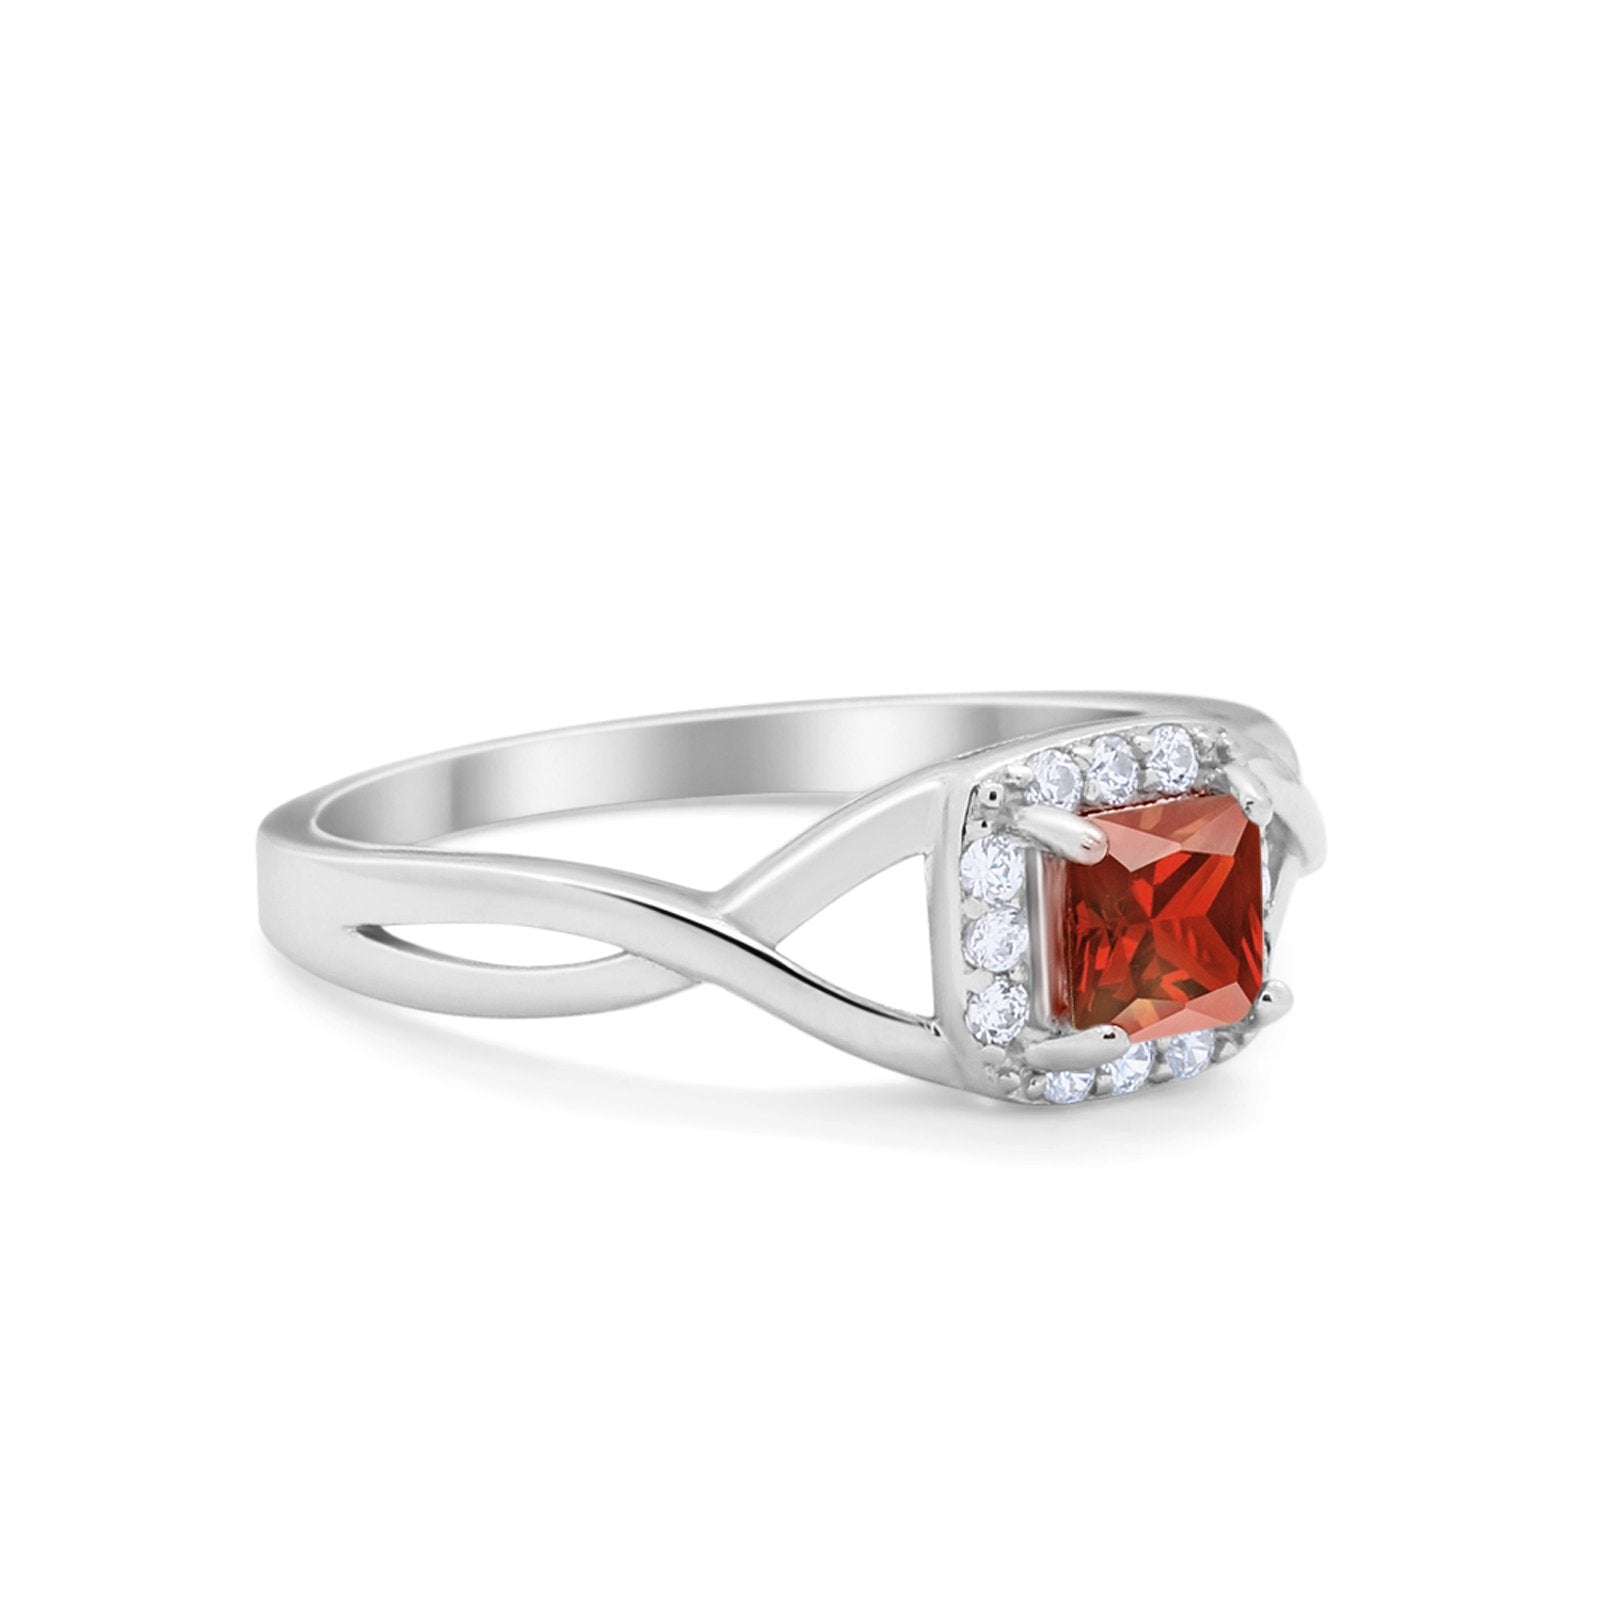 Solitaire Infinity Shank Ring Princess Cut Simulated Garnet CZ 925 Sterling Silver